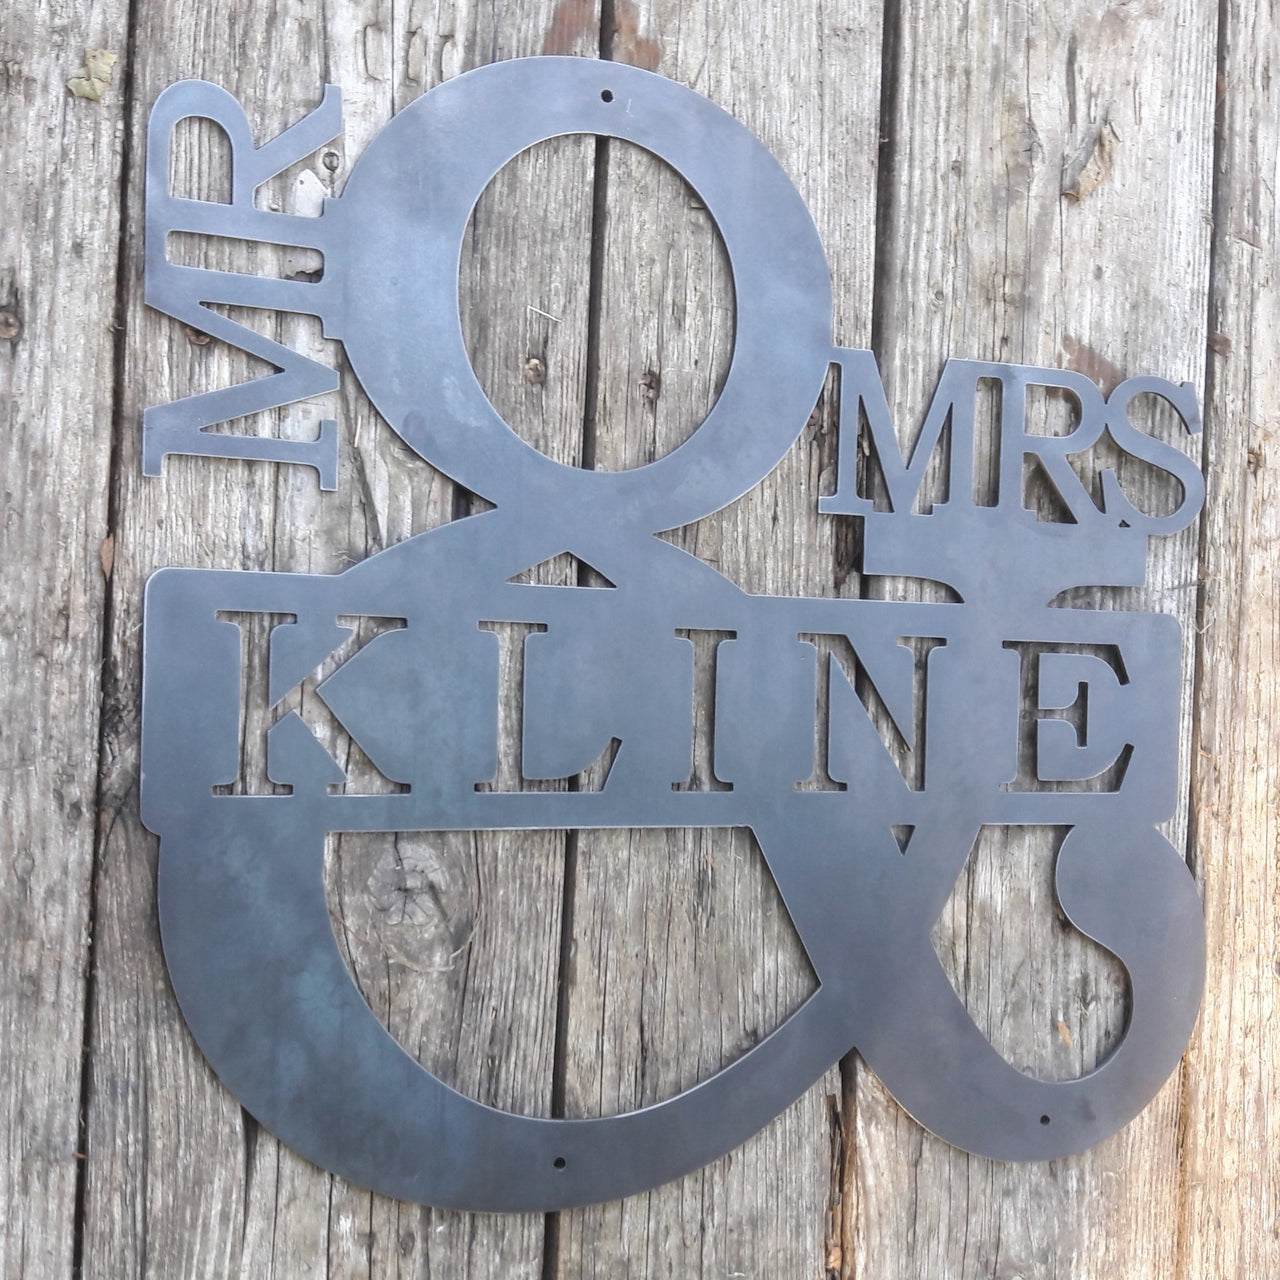 Personalized metal sign in the shape of an ampersand. The sign reads, "Mr. & Mrs. Kline".